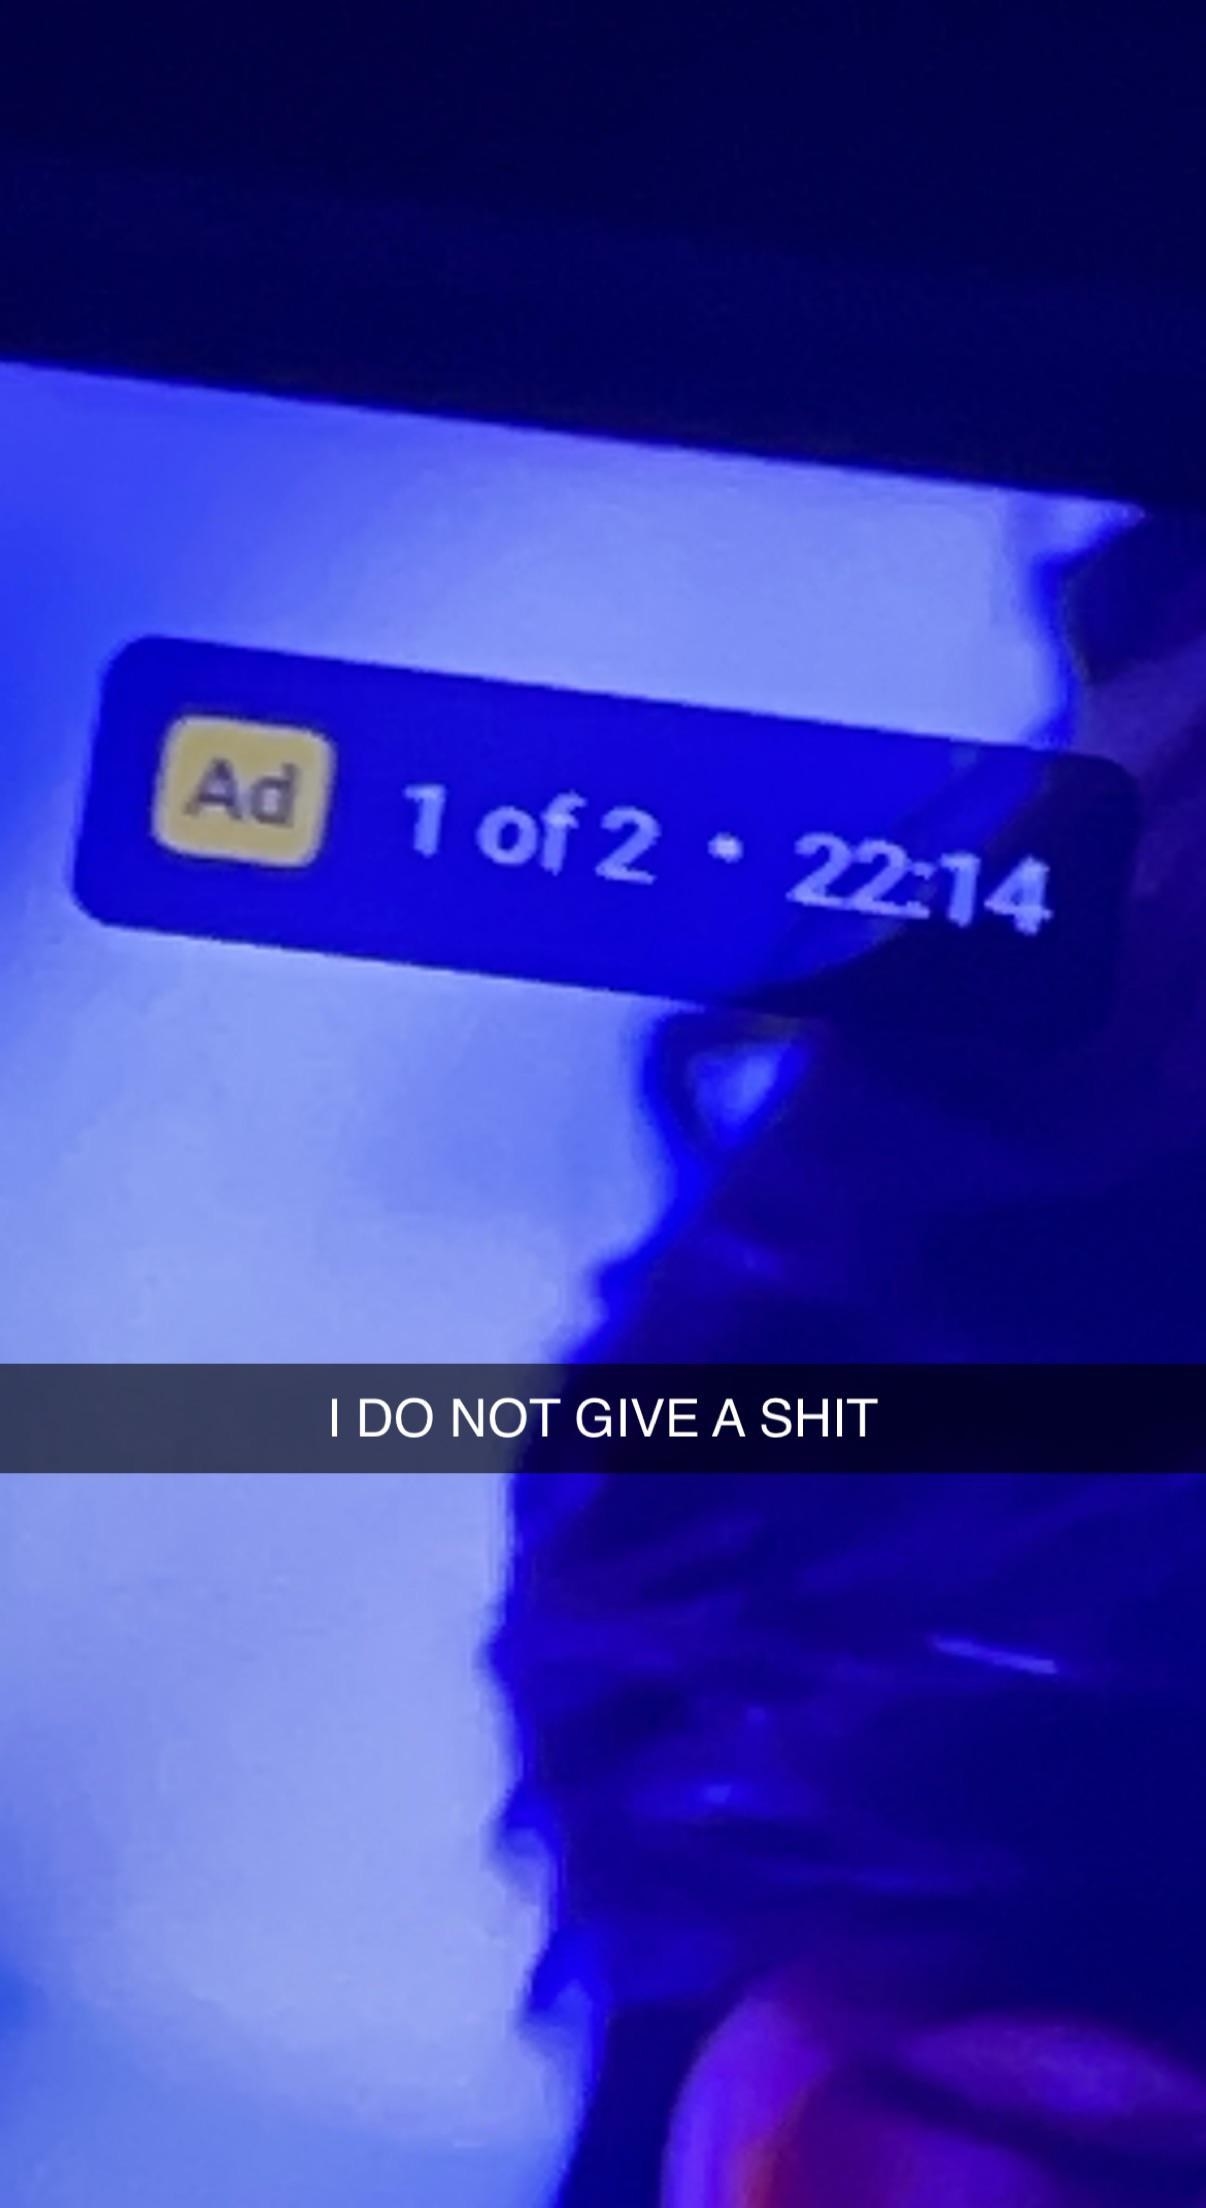 &quot;Ad 1 of 2 22:14&quot; with caption &quot;I do not give a shit&quot;